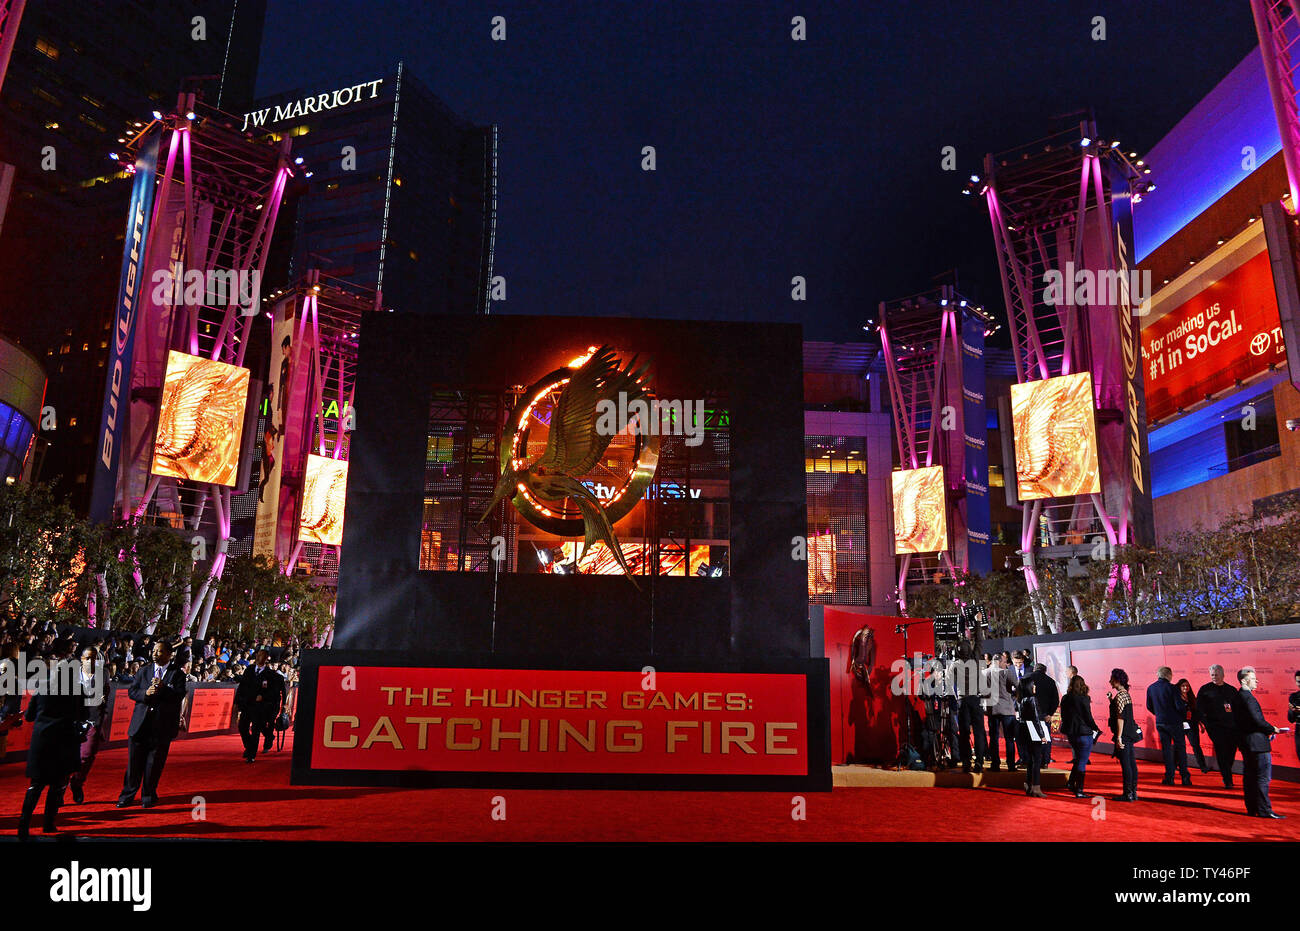 The Hunger Games: Catching Fire' Los Angeles premiere - Los Angeles Times